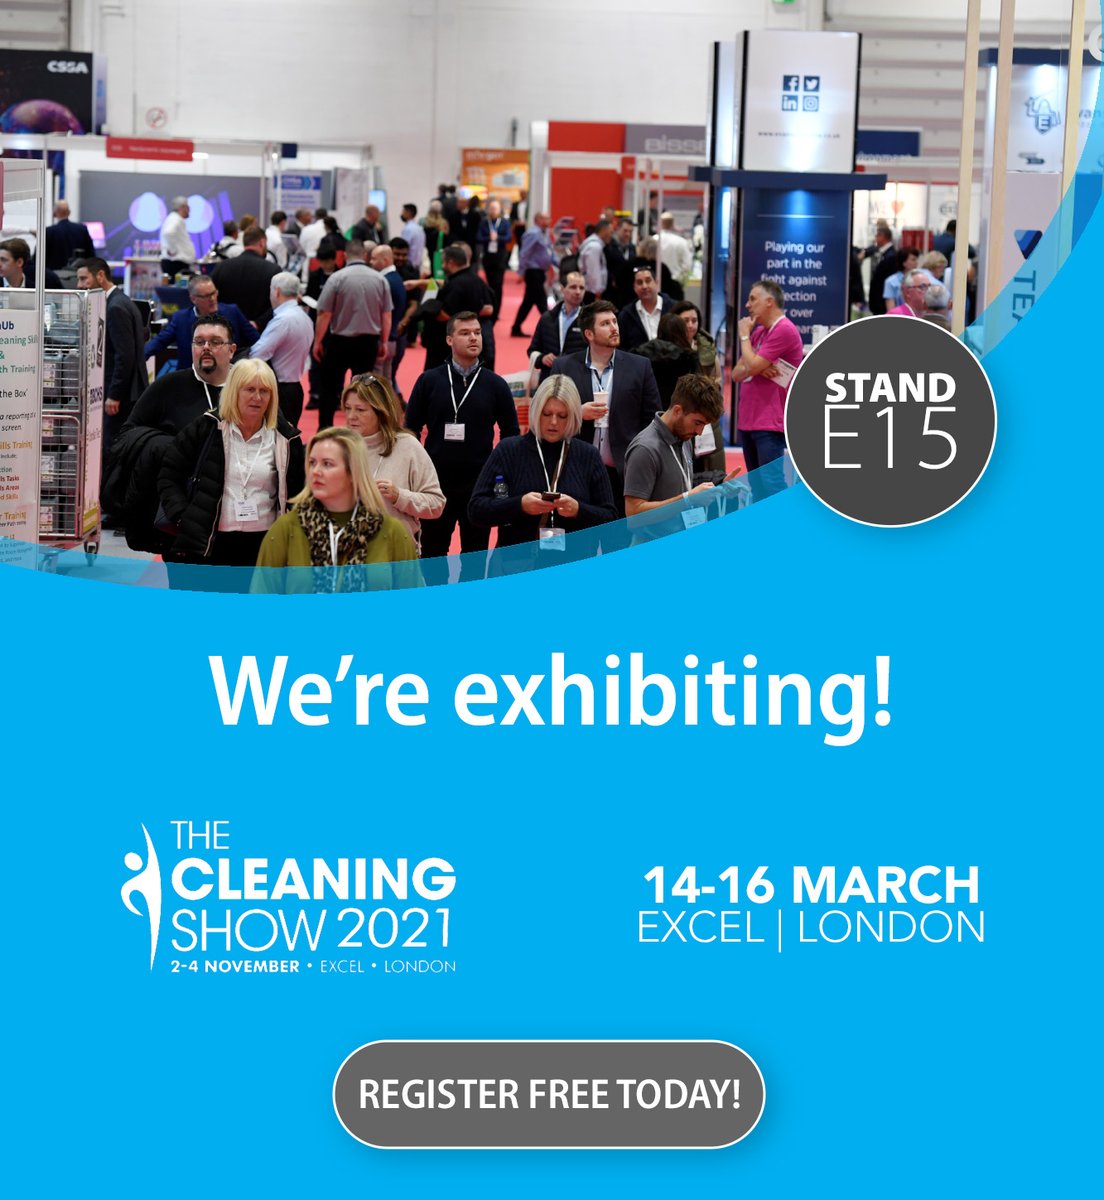 We’re exhibition at the @TheCleaningShow !

Click here to join us for free👉 bit.ly/3YuCe0A